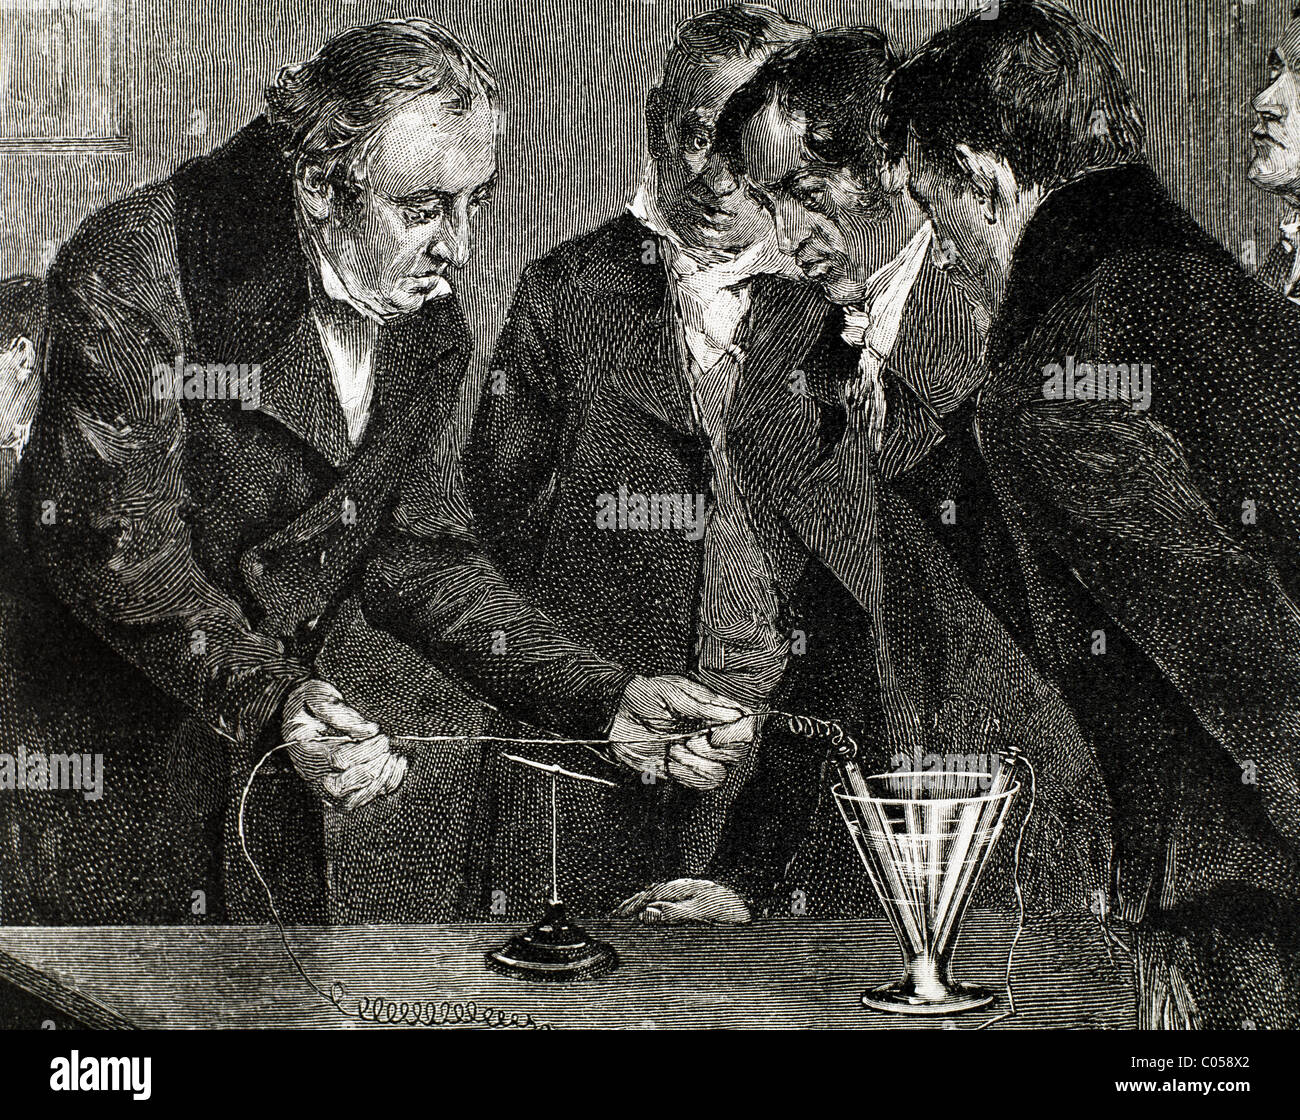 Oersted, Hans Christian (Copenhagen Rudkobing ,1777-1851). Danish physicist and chemist. Oersted discovers electromagnetism. Stock Photo